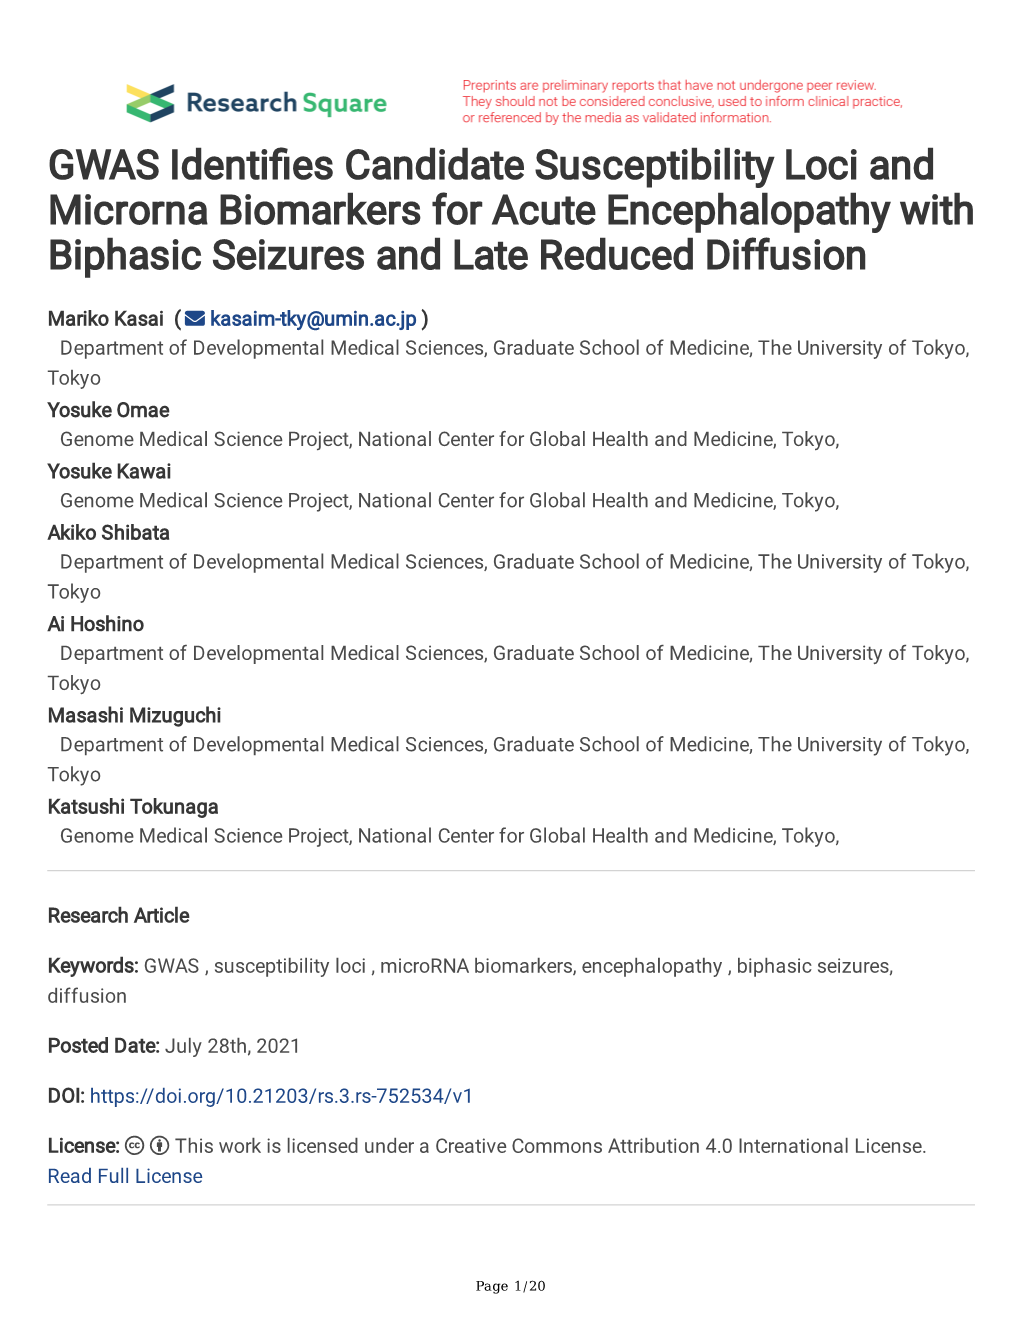 GWAS Identi Es Candidate Susceptibility Loci and Microrna Biomarkers for Acute Encephalopathy with Biphasic Seizures and Late Re